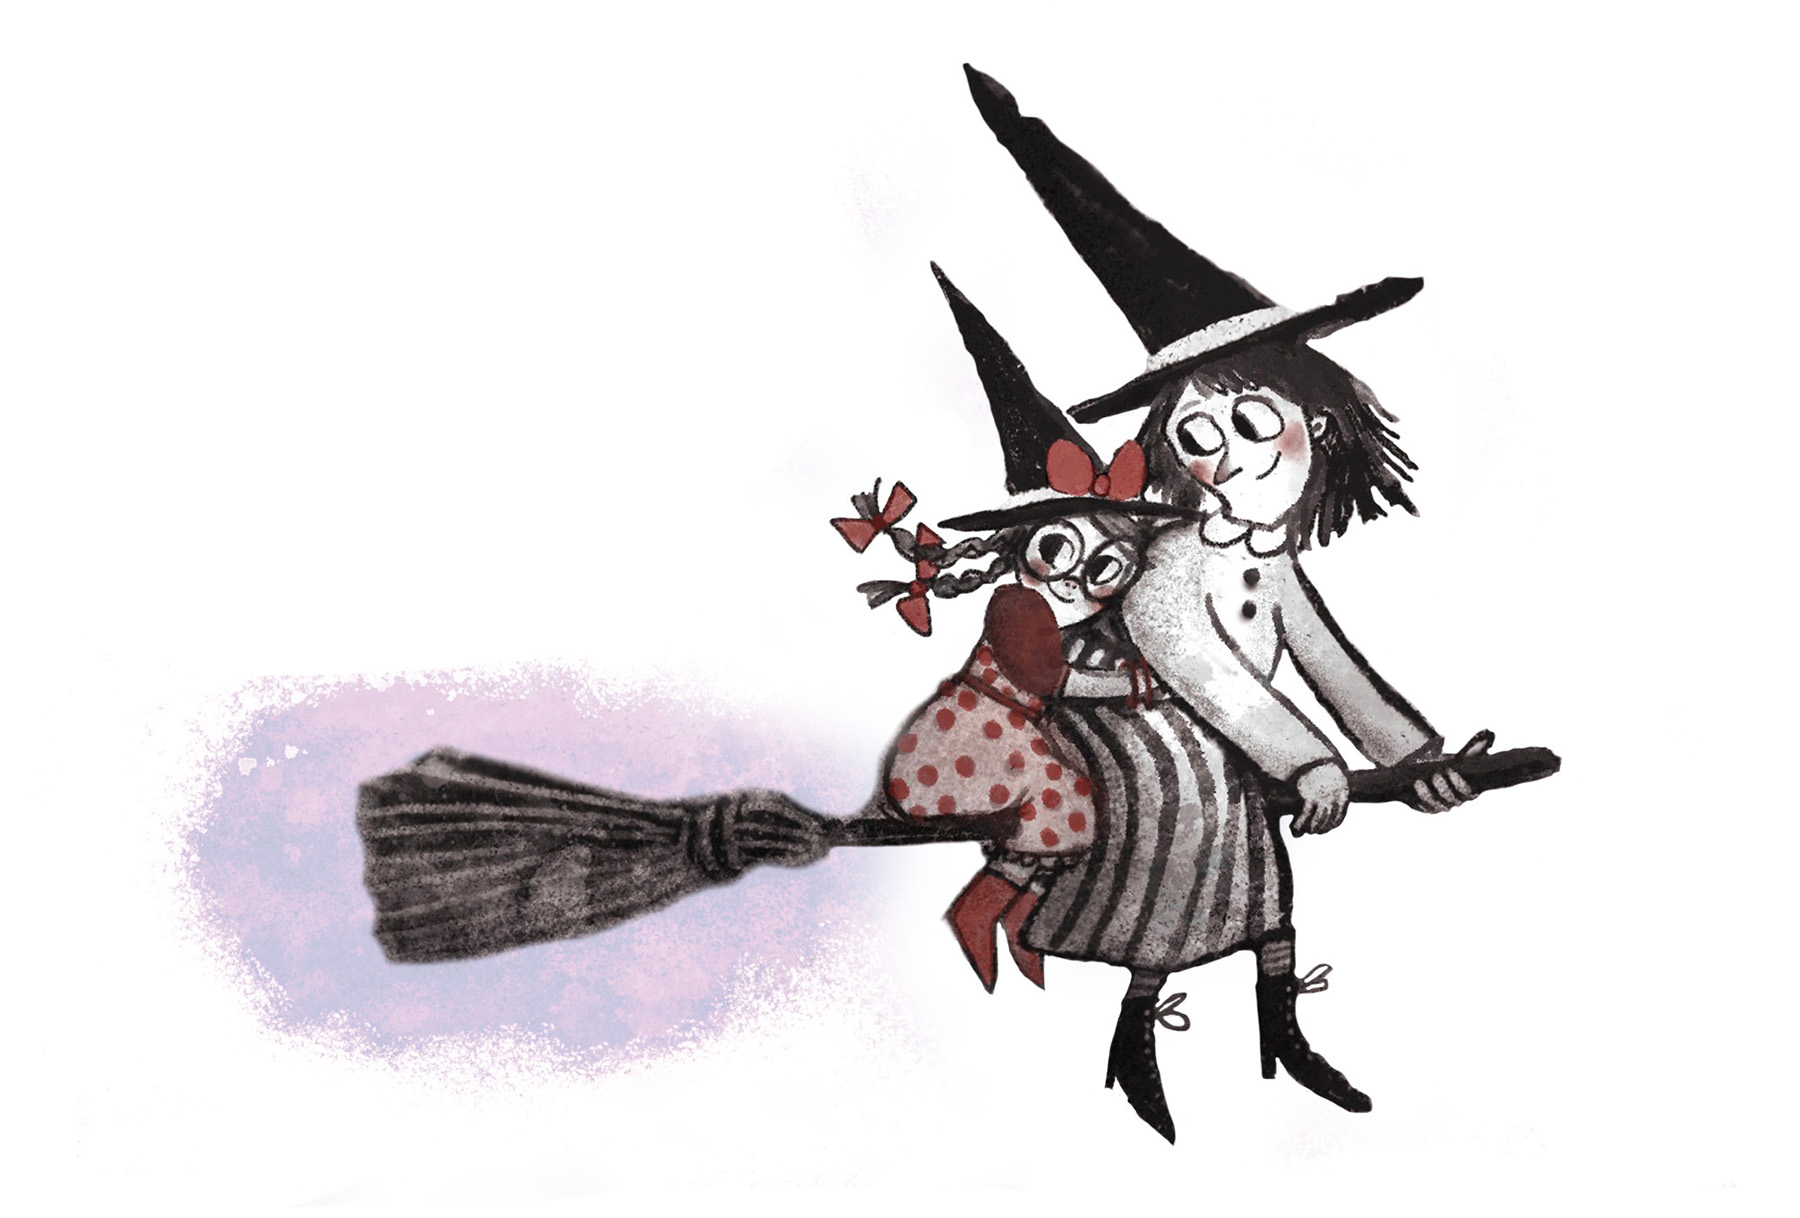 Crimson Twill and her mom riding a broomstick.